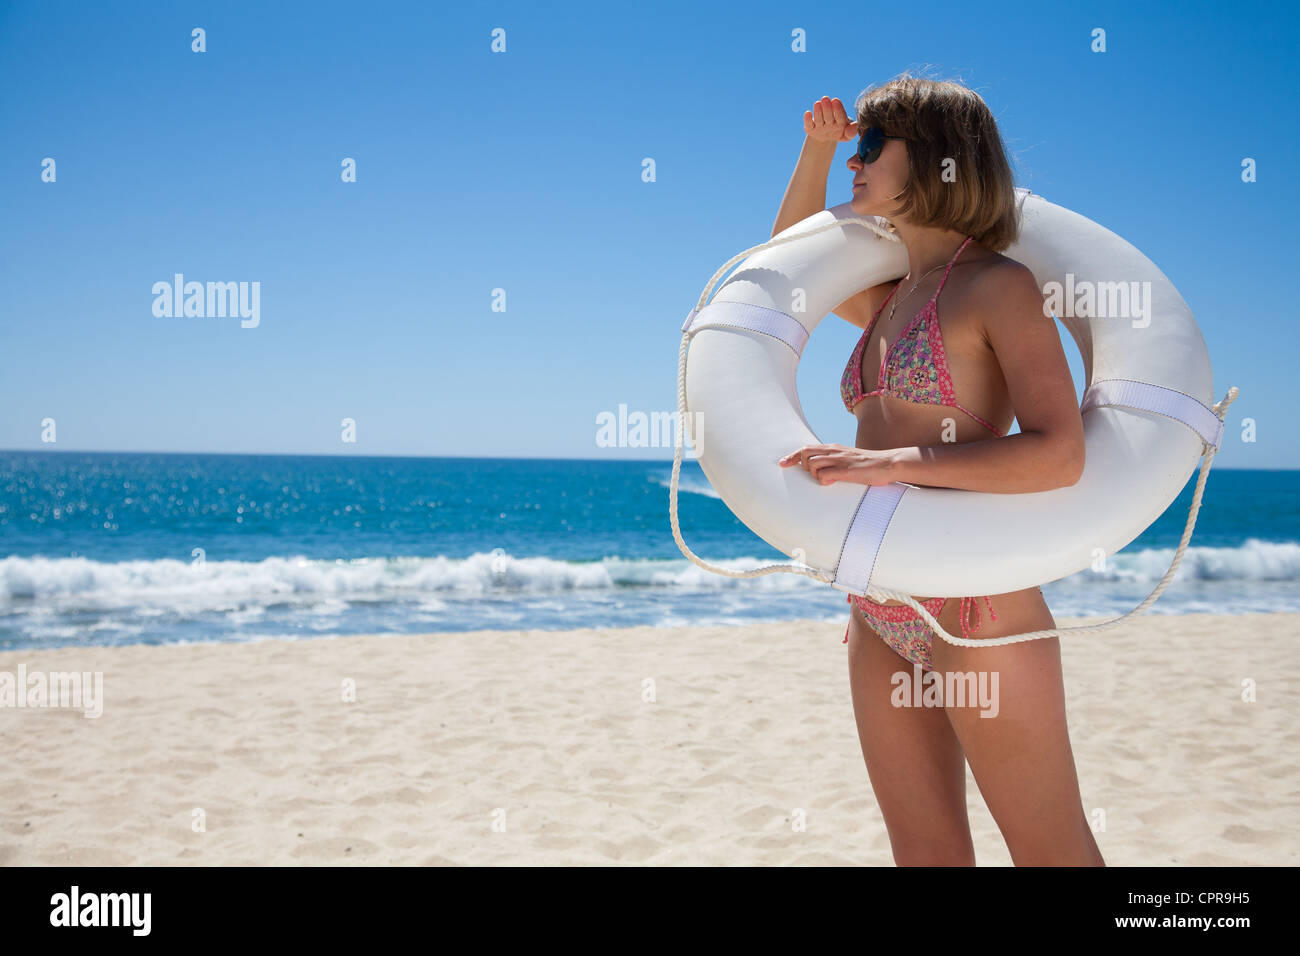 Young woman watching the bay with a white life buoy Stock Photo